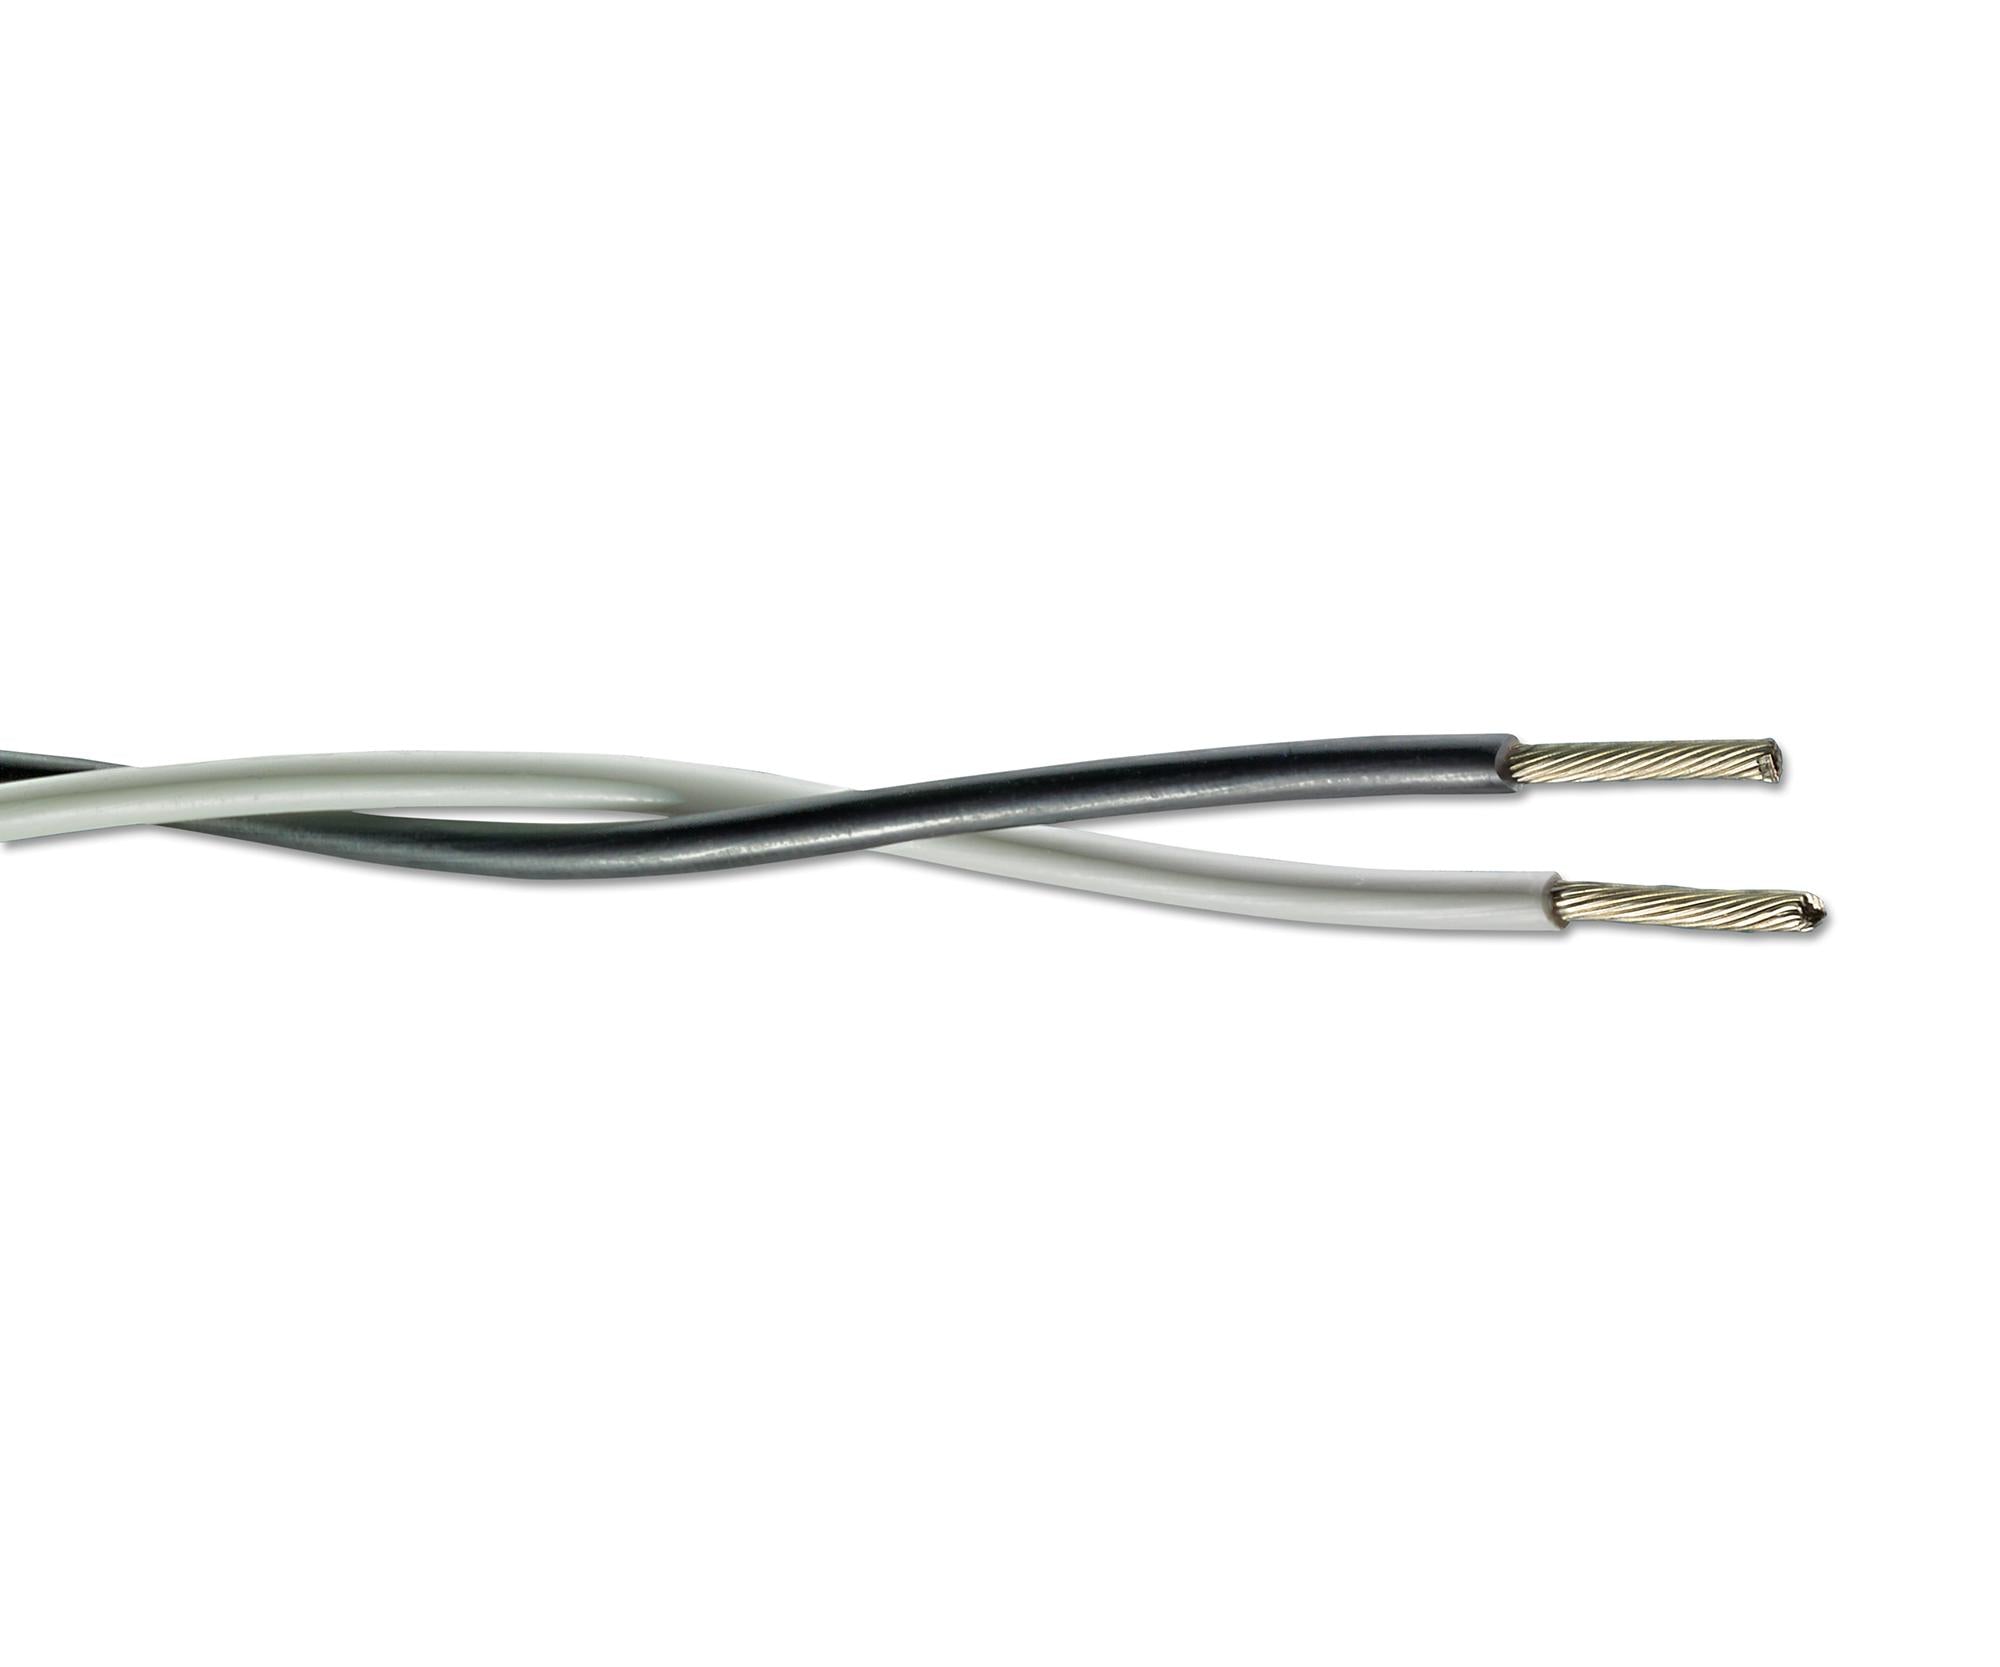 44A0121-20-0/9 UNSHLD FLEX CABLE, 2COND, 20AWG, 100M RAYCHEM - TE CONNECTIVITY